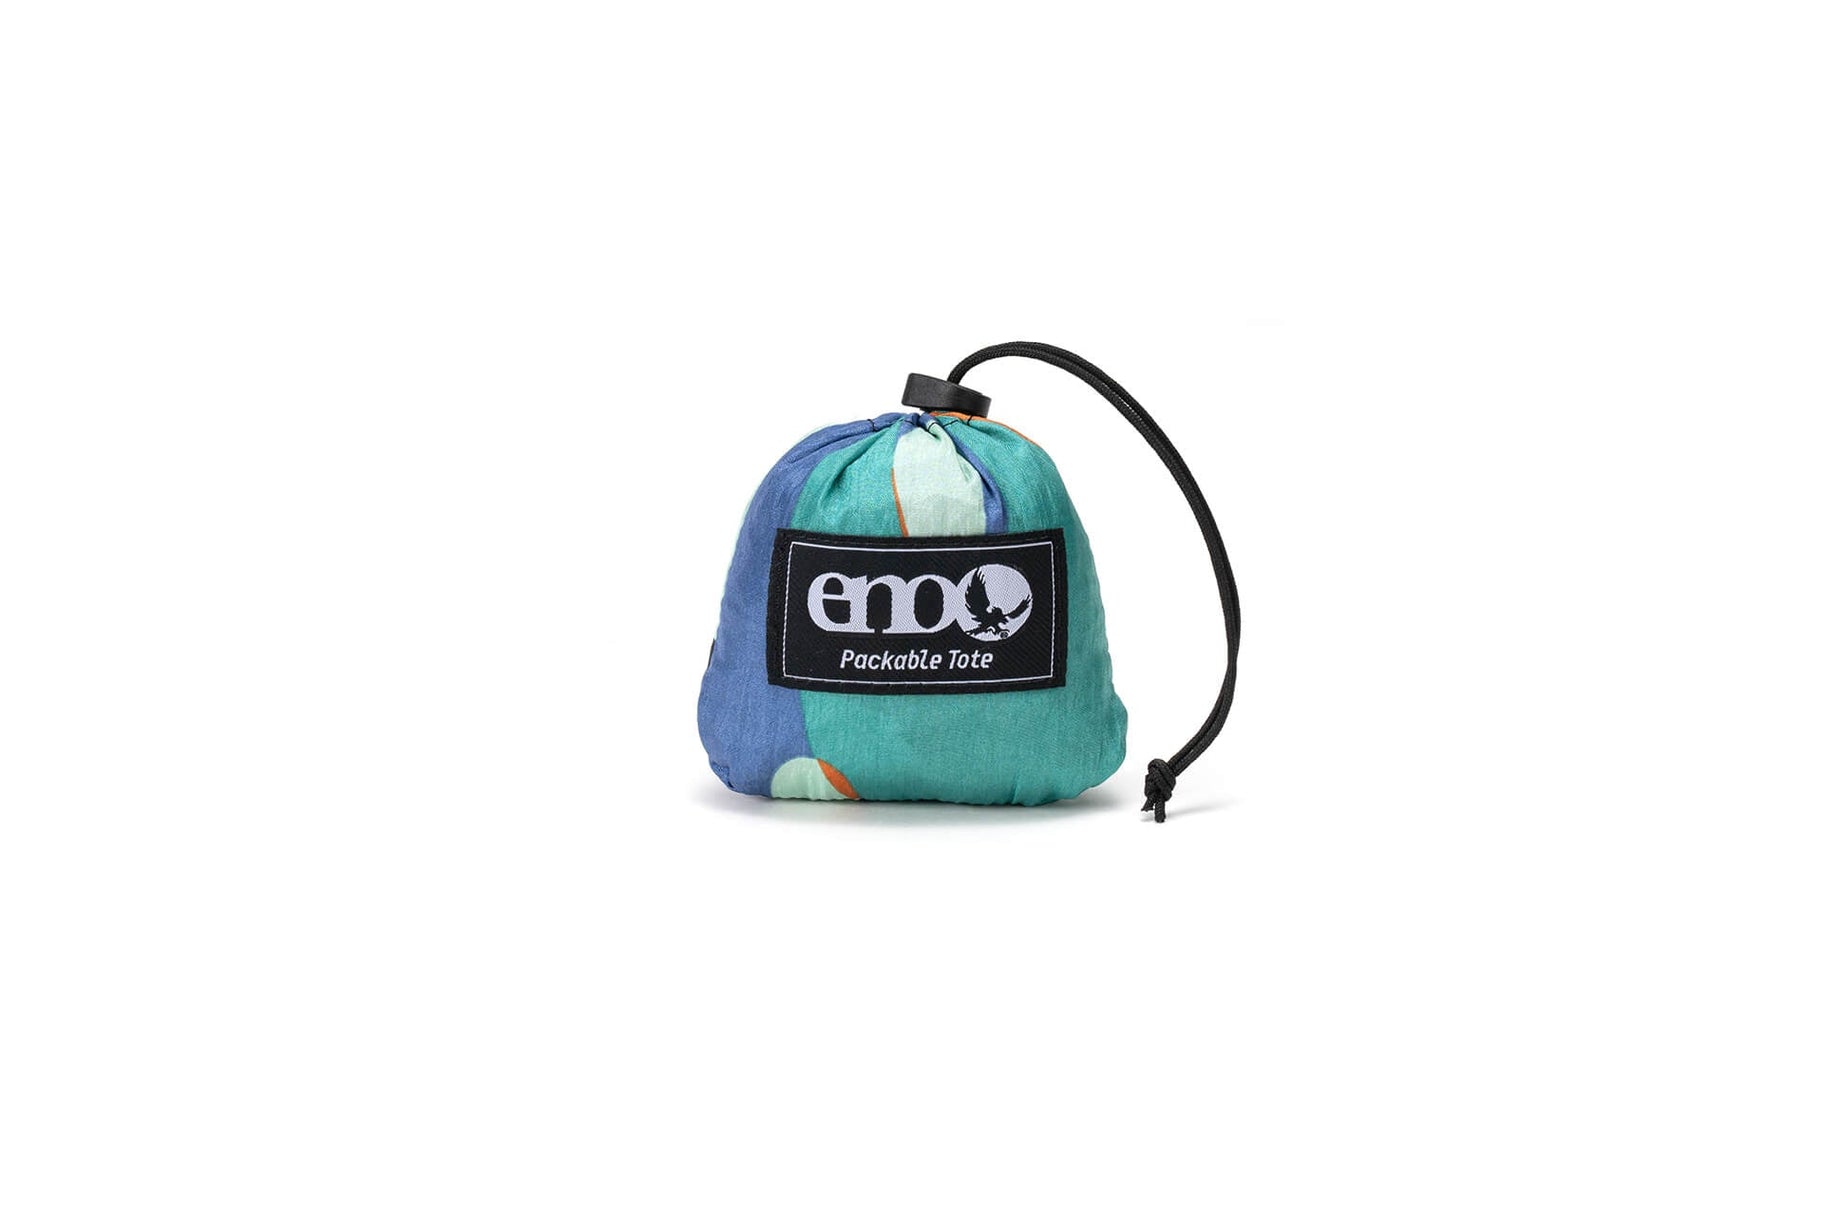 Packable Tote Print - Responsibly Made, Reusable Grocery Bag | ENO